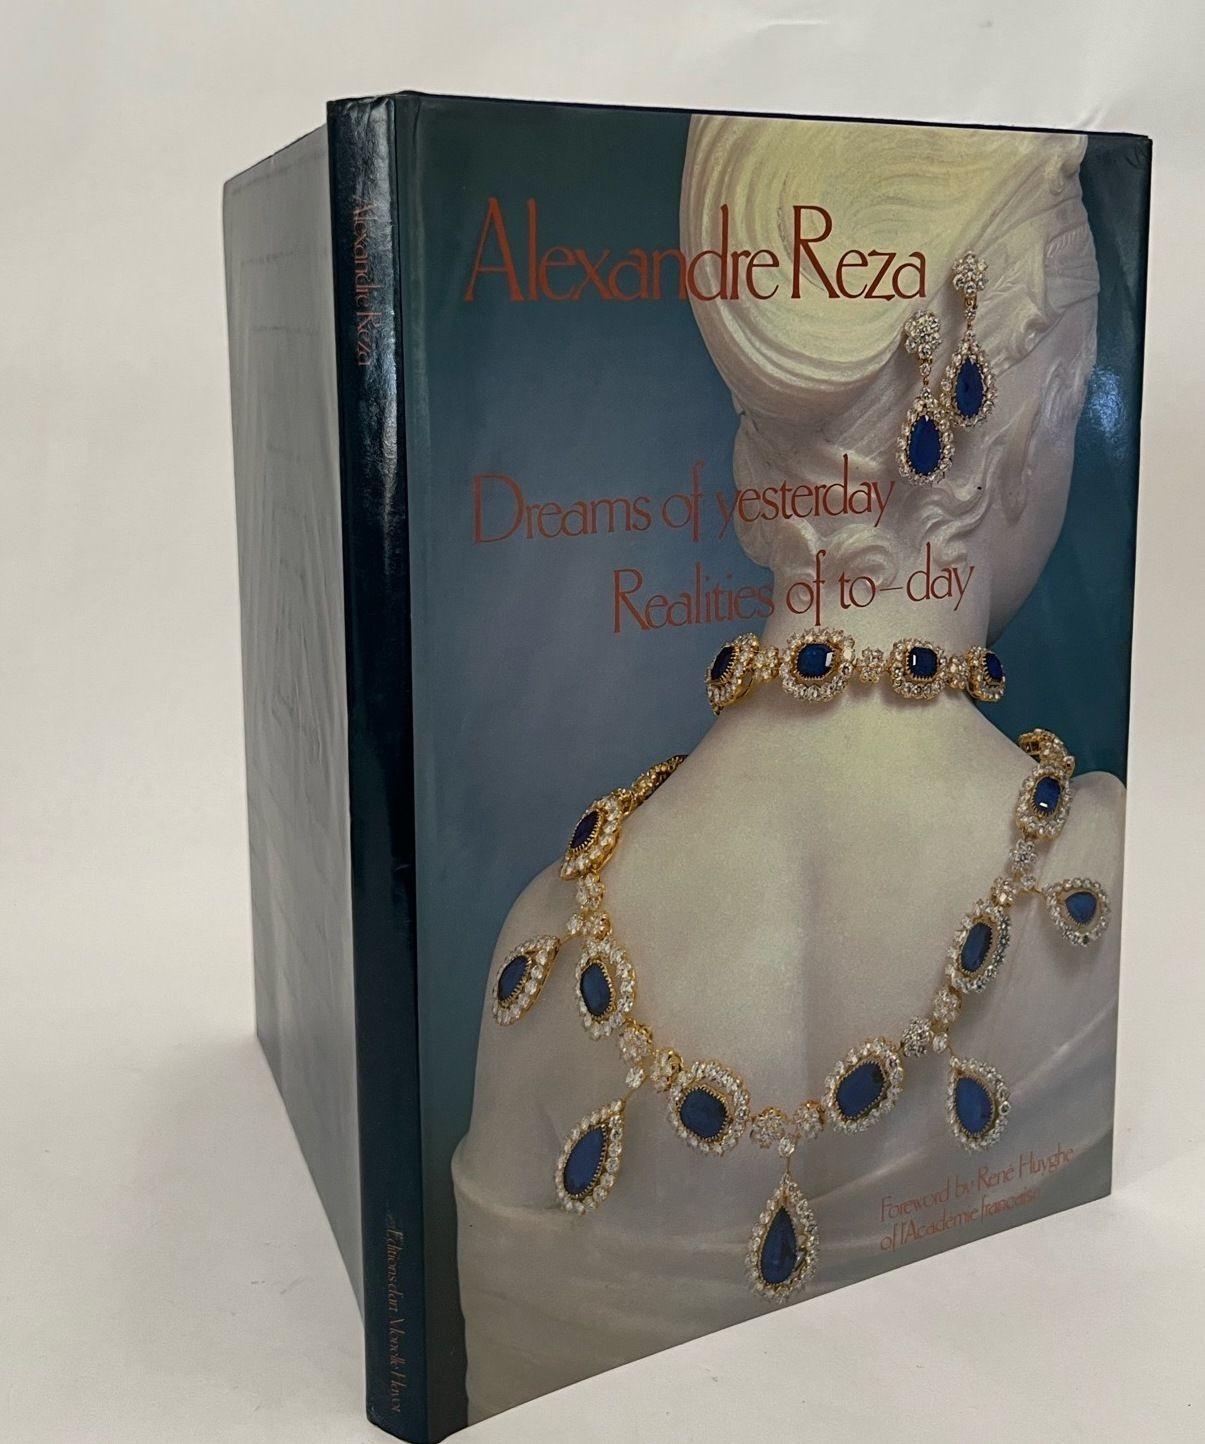 Alexandre Reza: Dreams of Yesterday Realities of To-day is a book about the life and work of Alexandre Reza, a Paris-based jeweler known for his diverse and rare collection of precious gemstones.
Large hardcover coffee table book written by Arlette